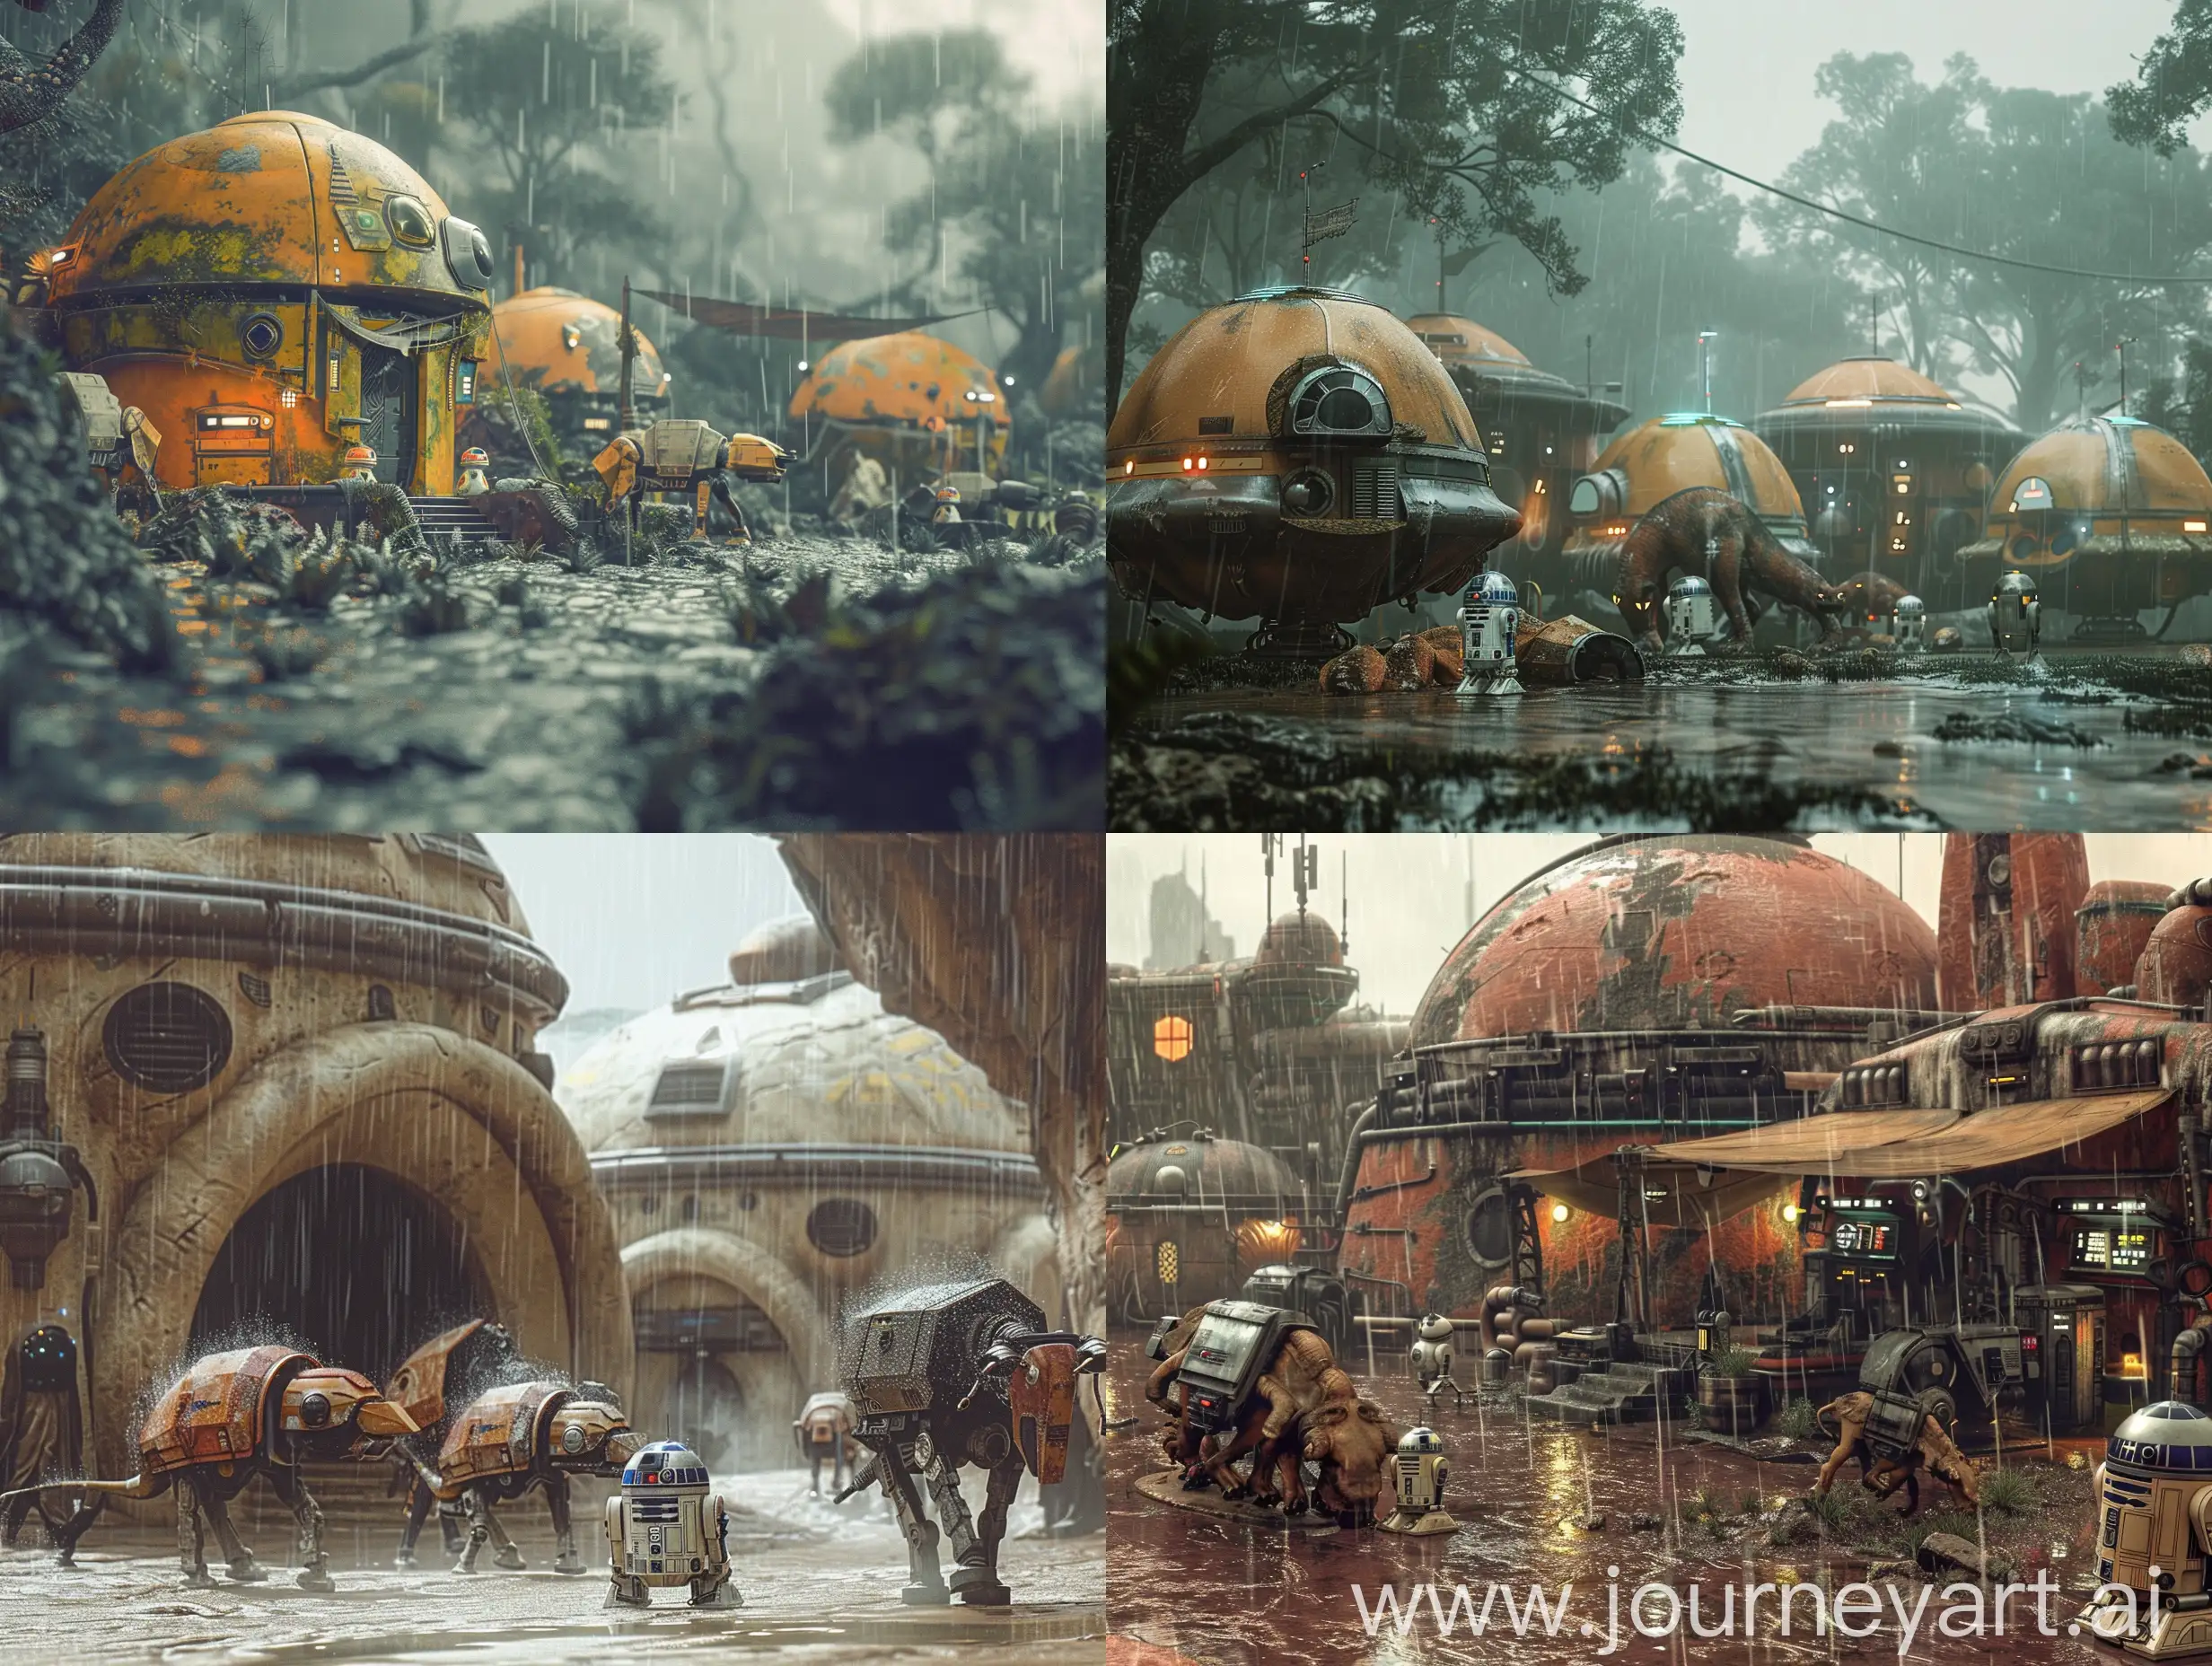  Tiny alien village in the style of classic Star Wars, burden beasts, droids, rain, moody. 